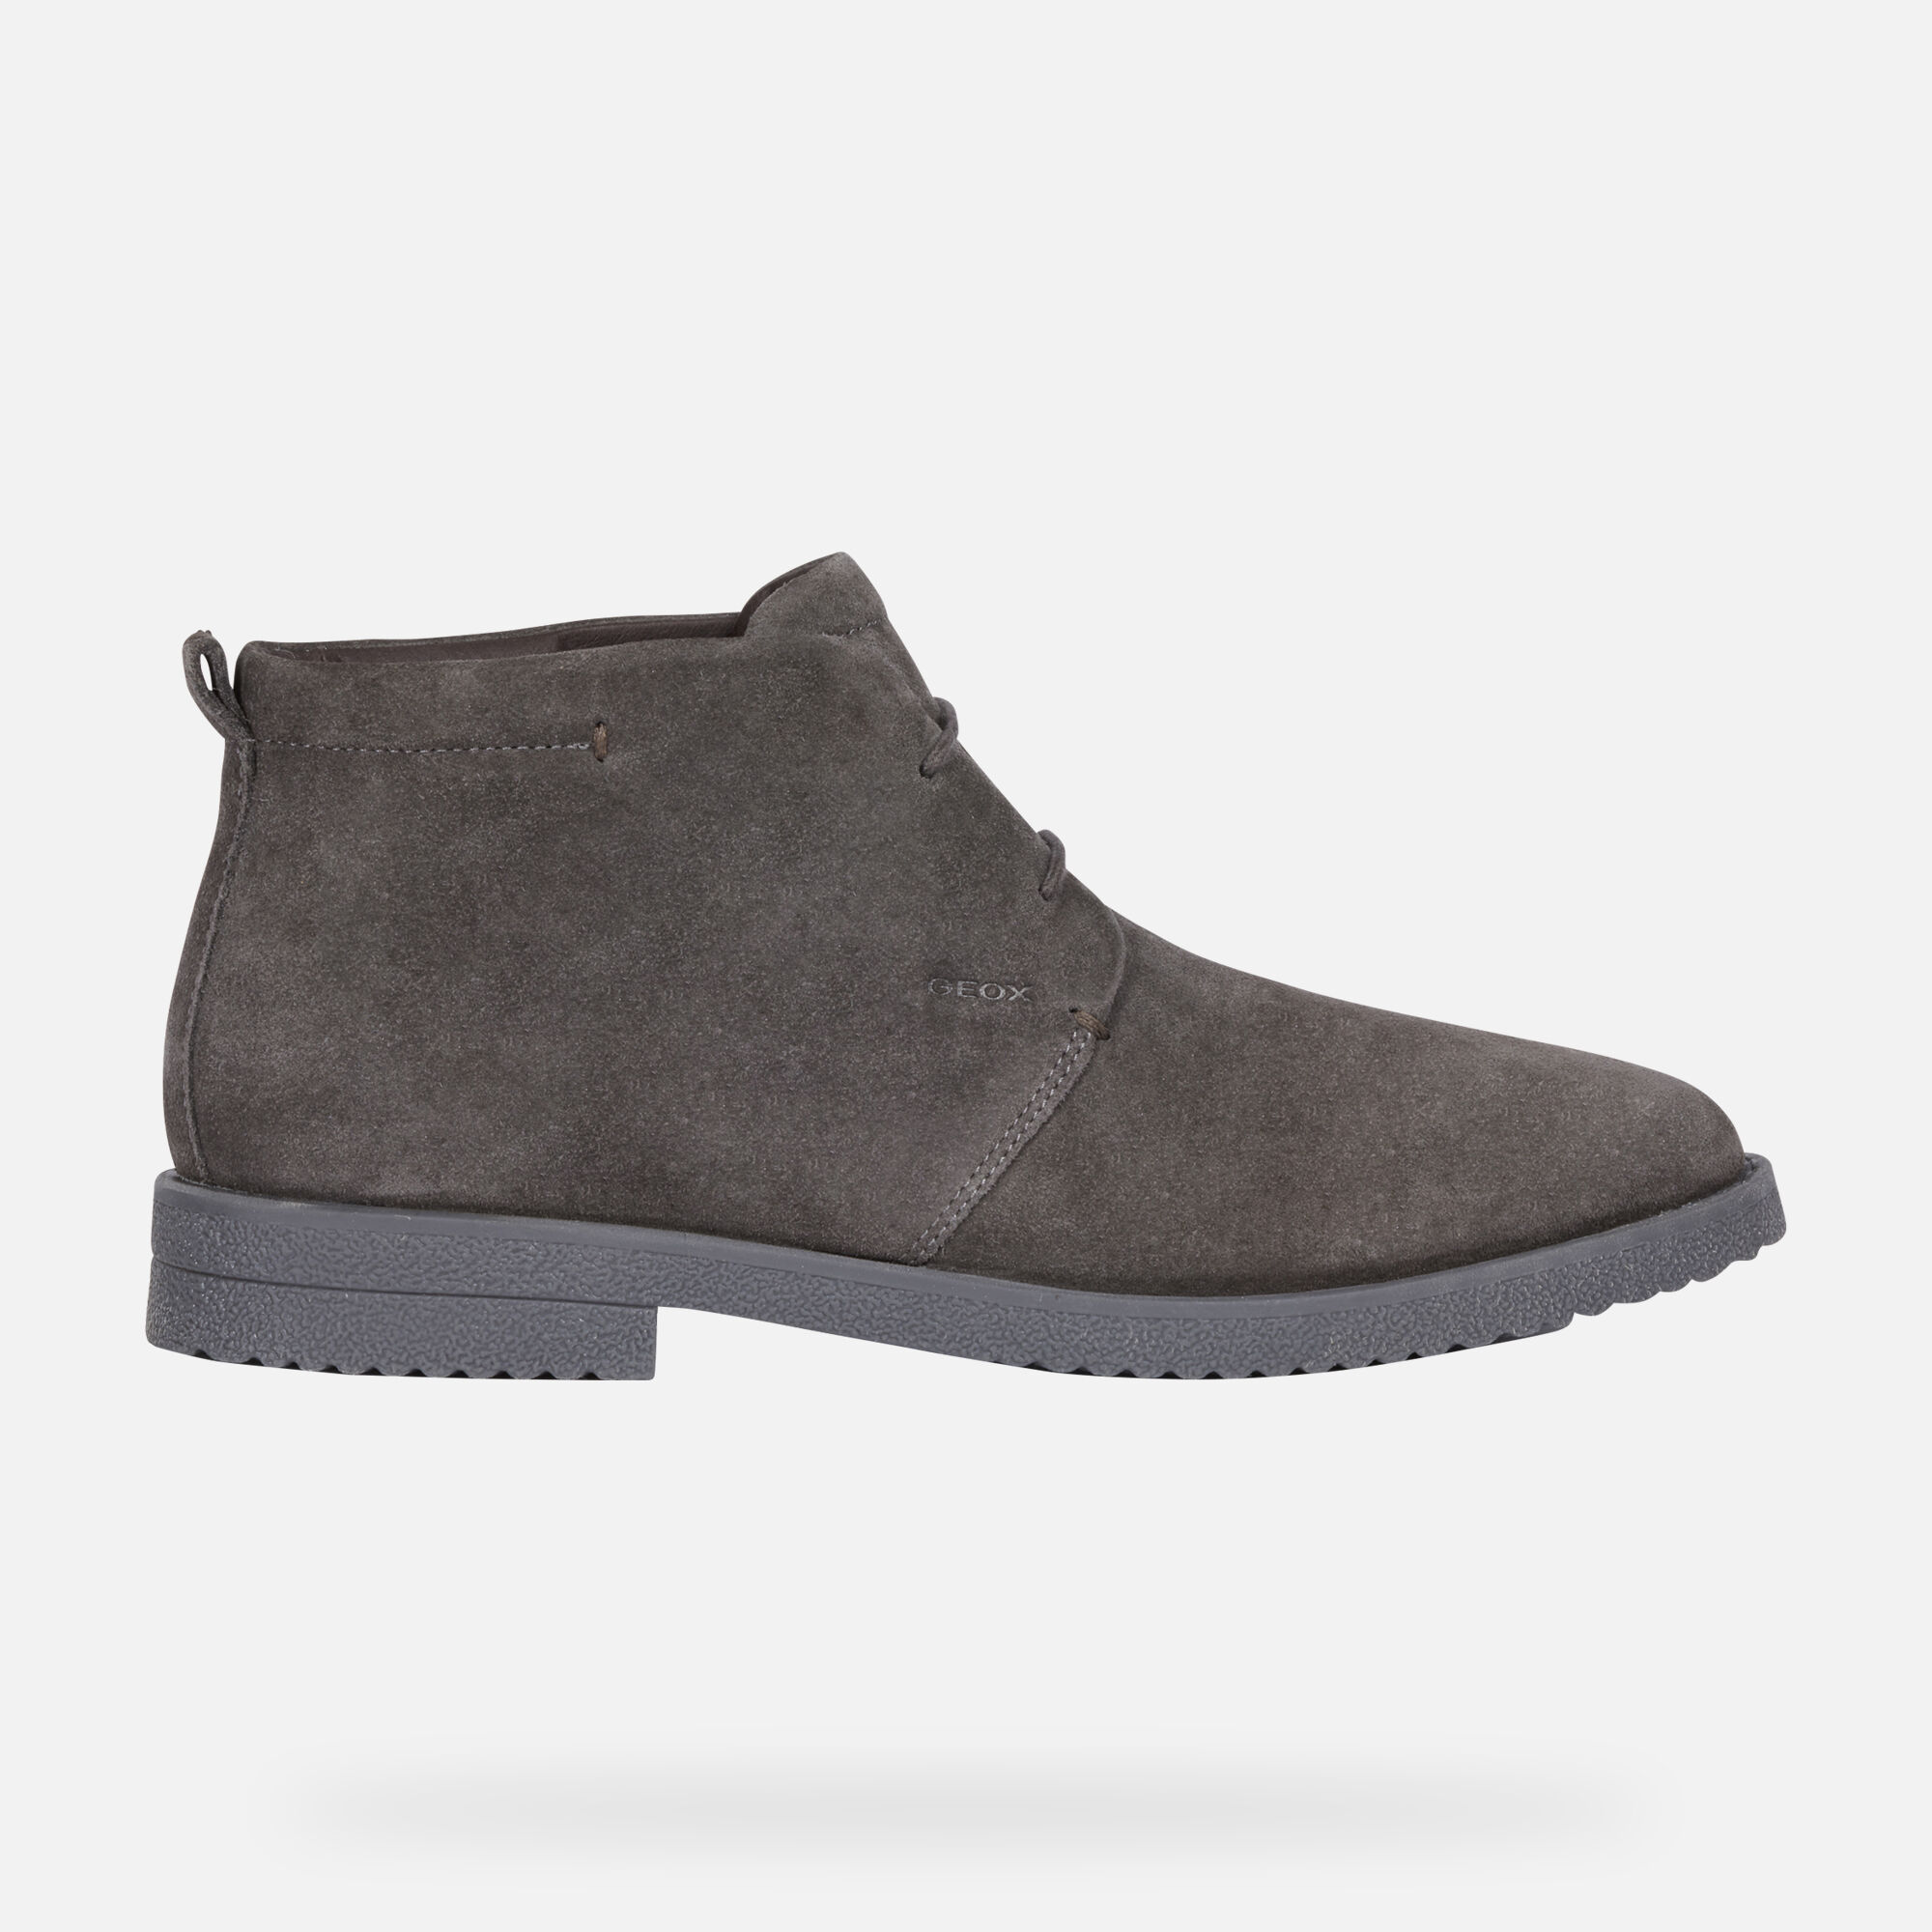 Geox BRANDLED Homme Chaussures Boue | Geox ® Boutique en ligne